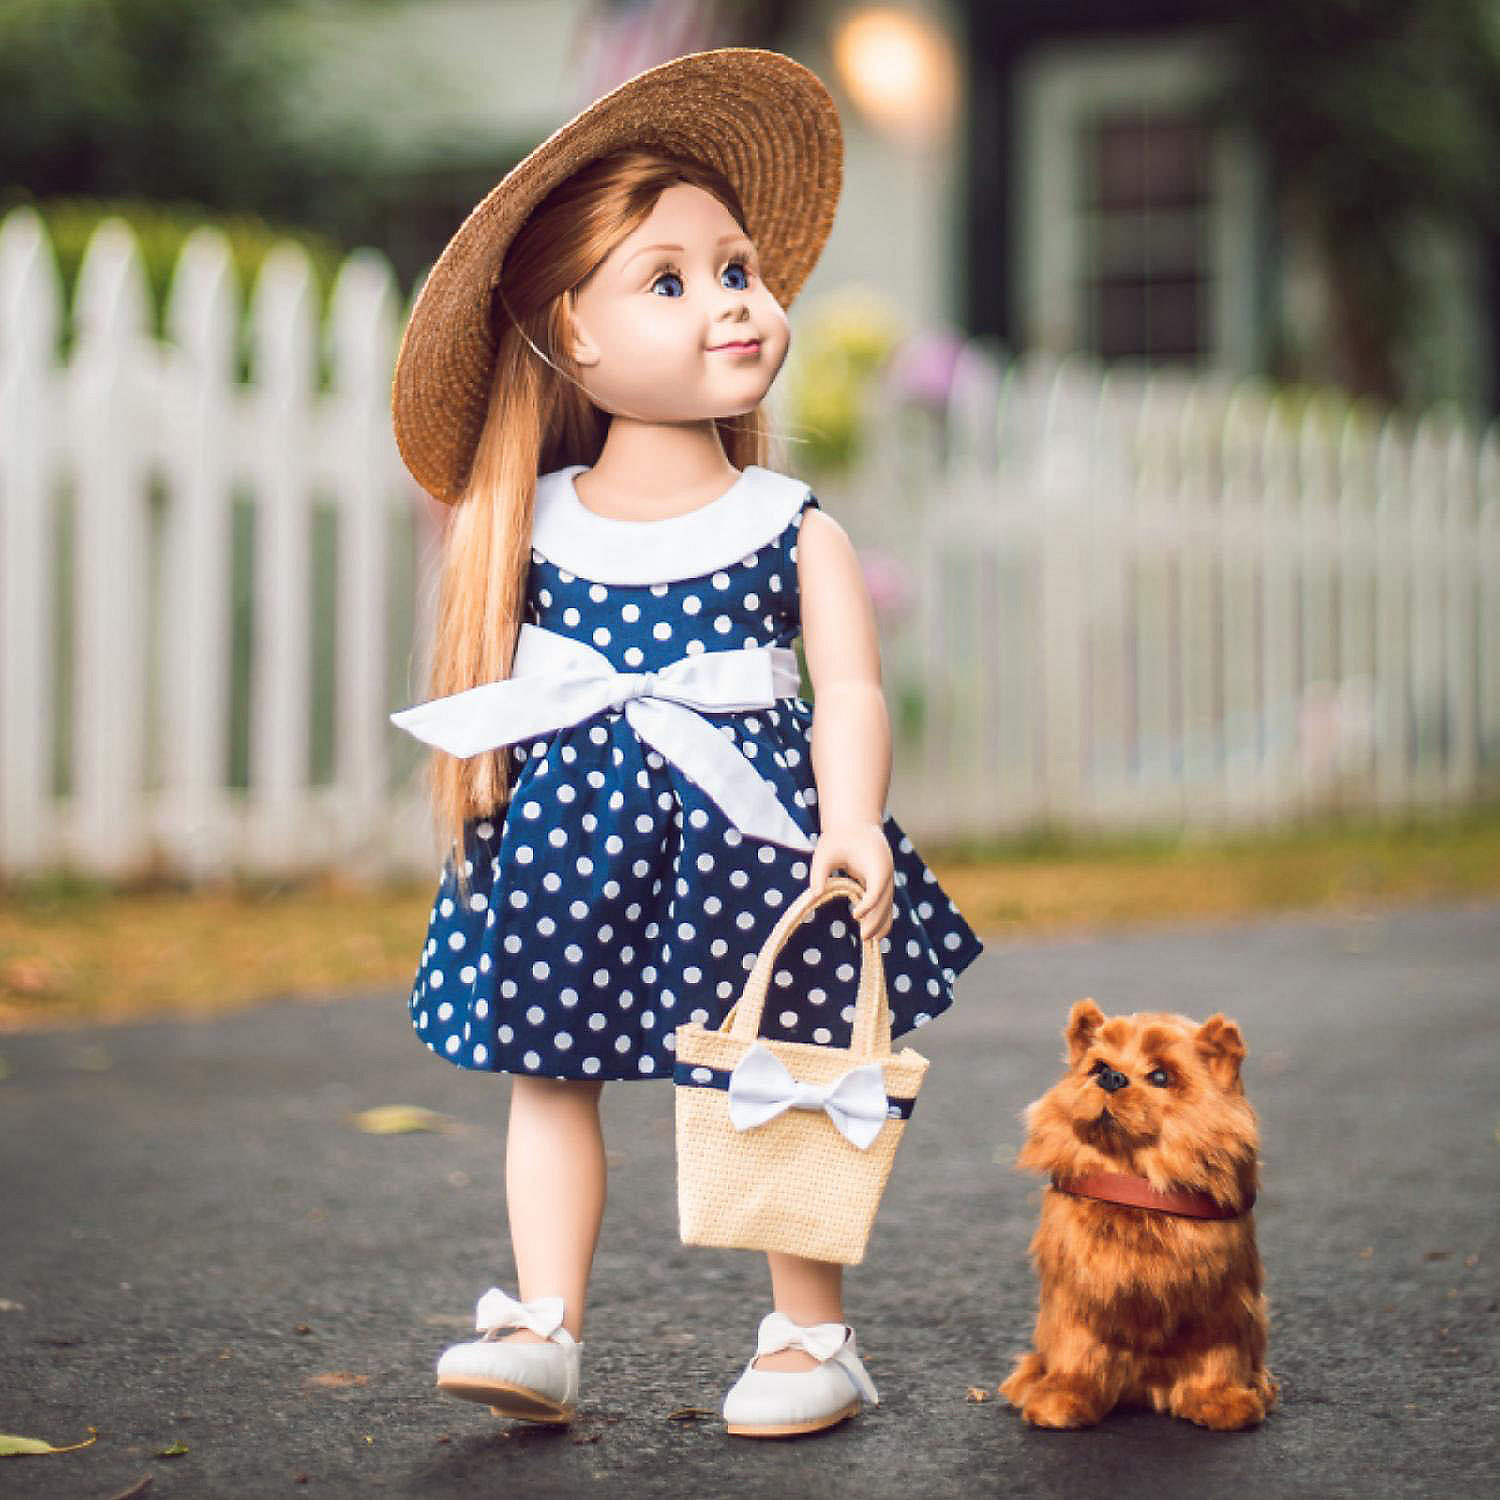 The Queen's Treasures 18 Inch Girl Doll American Clothes and Accessories,  Navy and White 1950 Style Polka Dot Dress with Hat and Handbag | Oriental  Trading